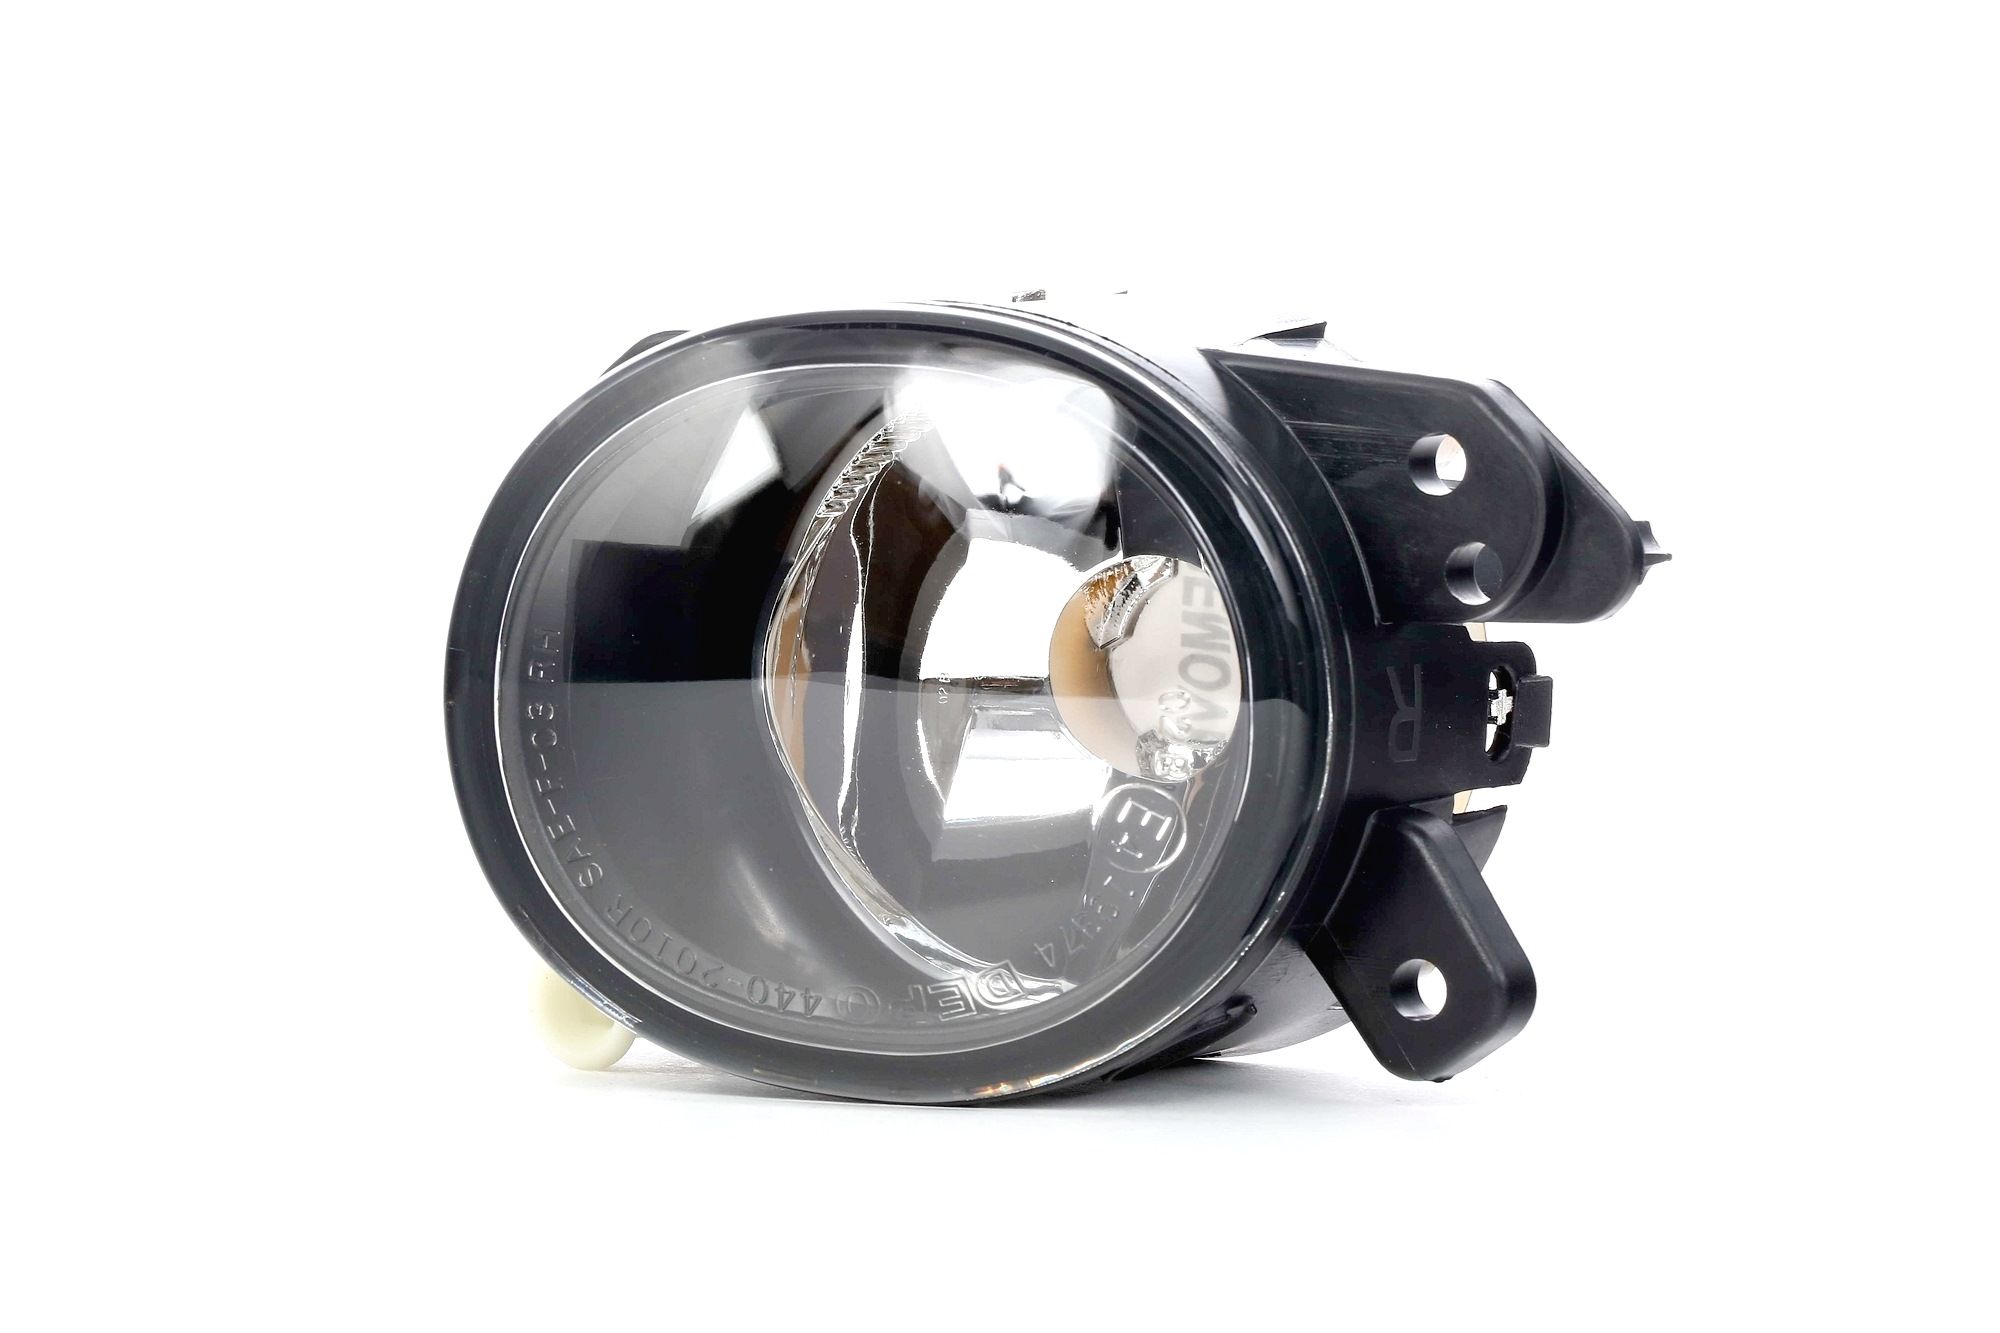 JOHNS Fog lamp rear and front Mercedes C207 new 50 52 30